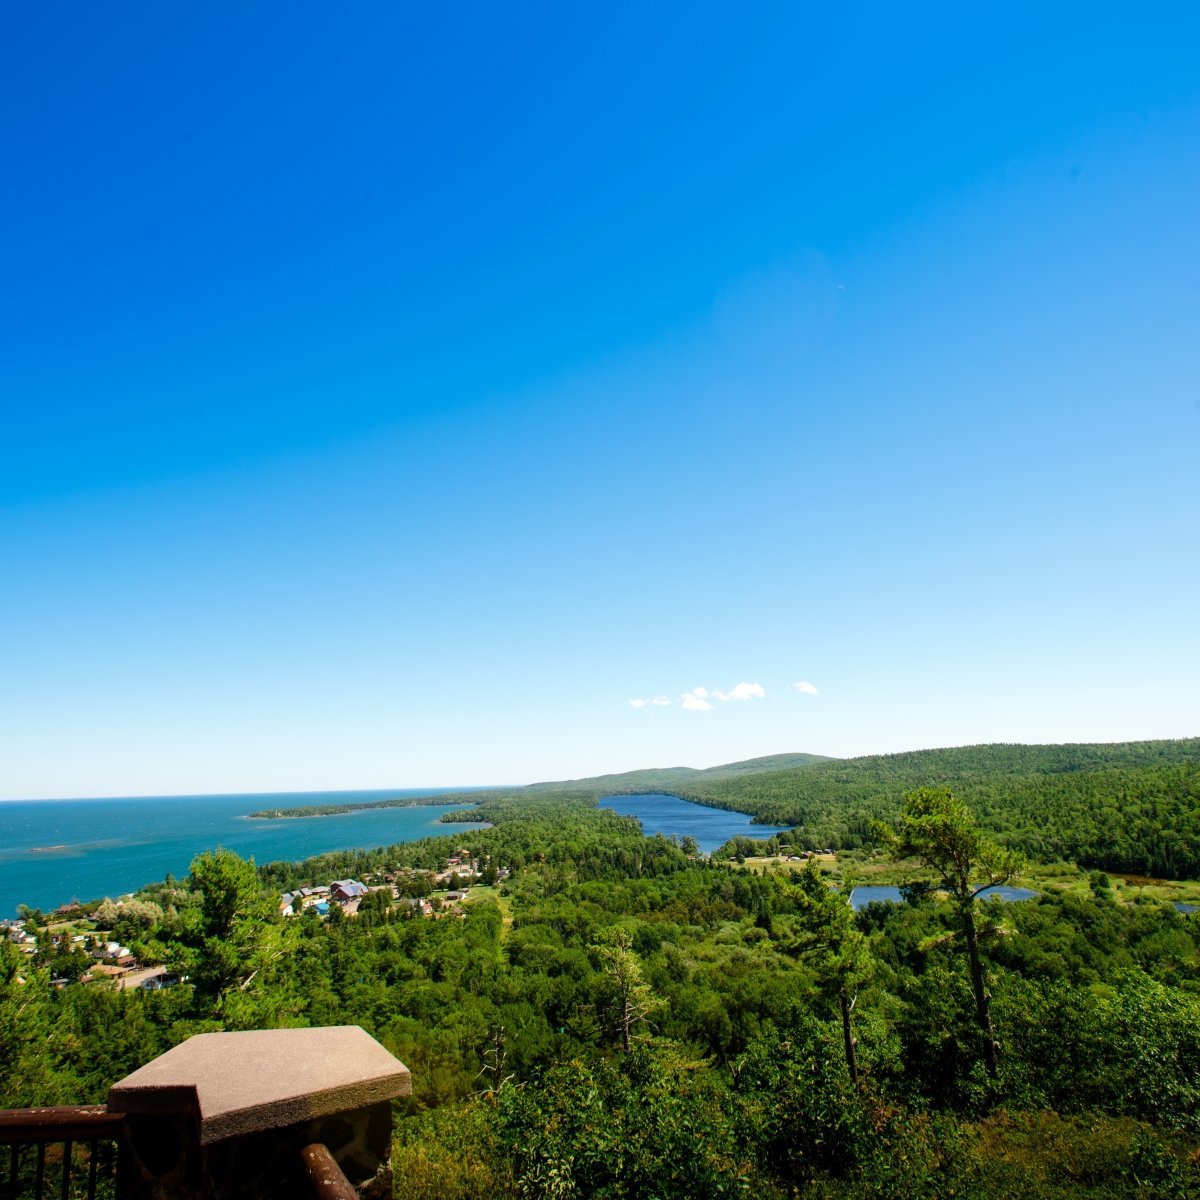 Copper Harbor overlook in the summer time with views of Lake Superior